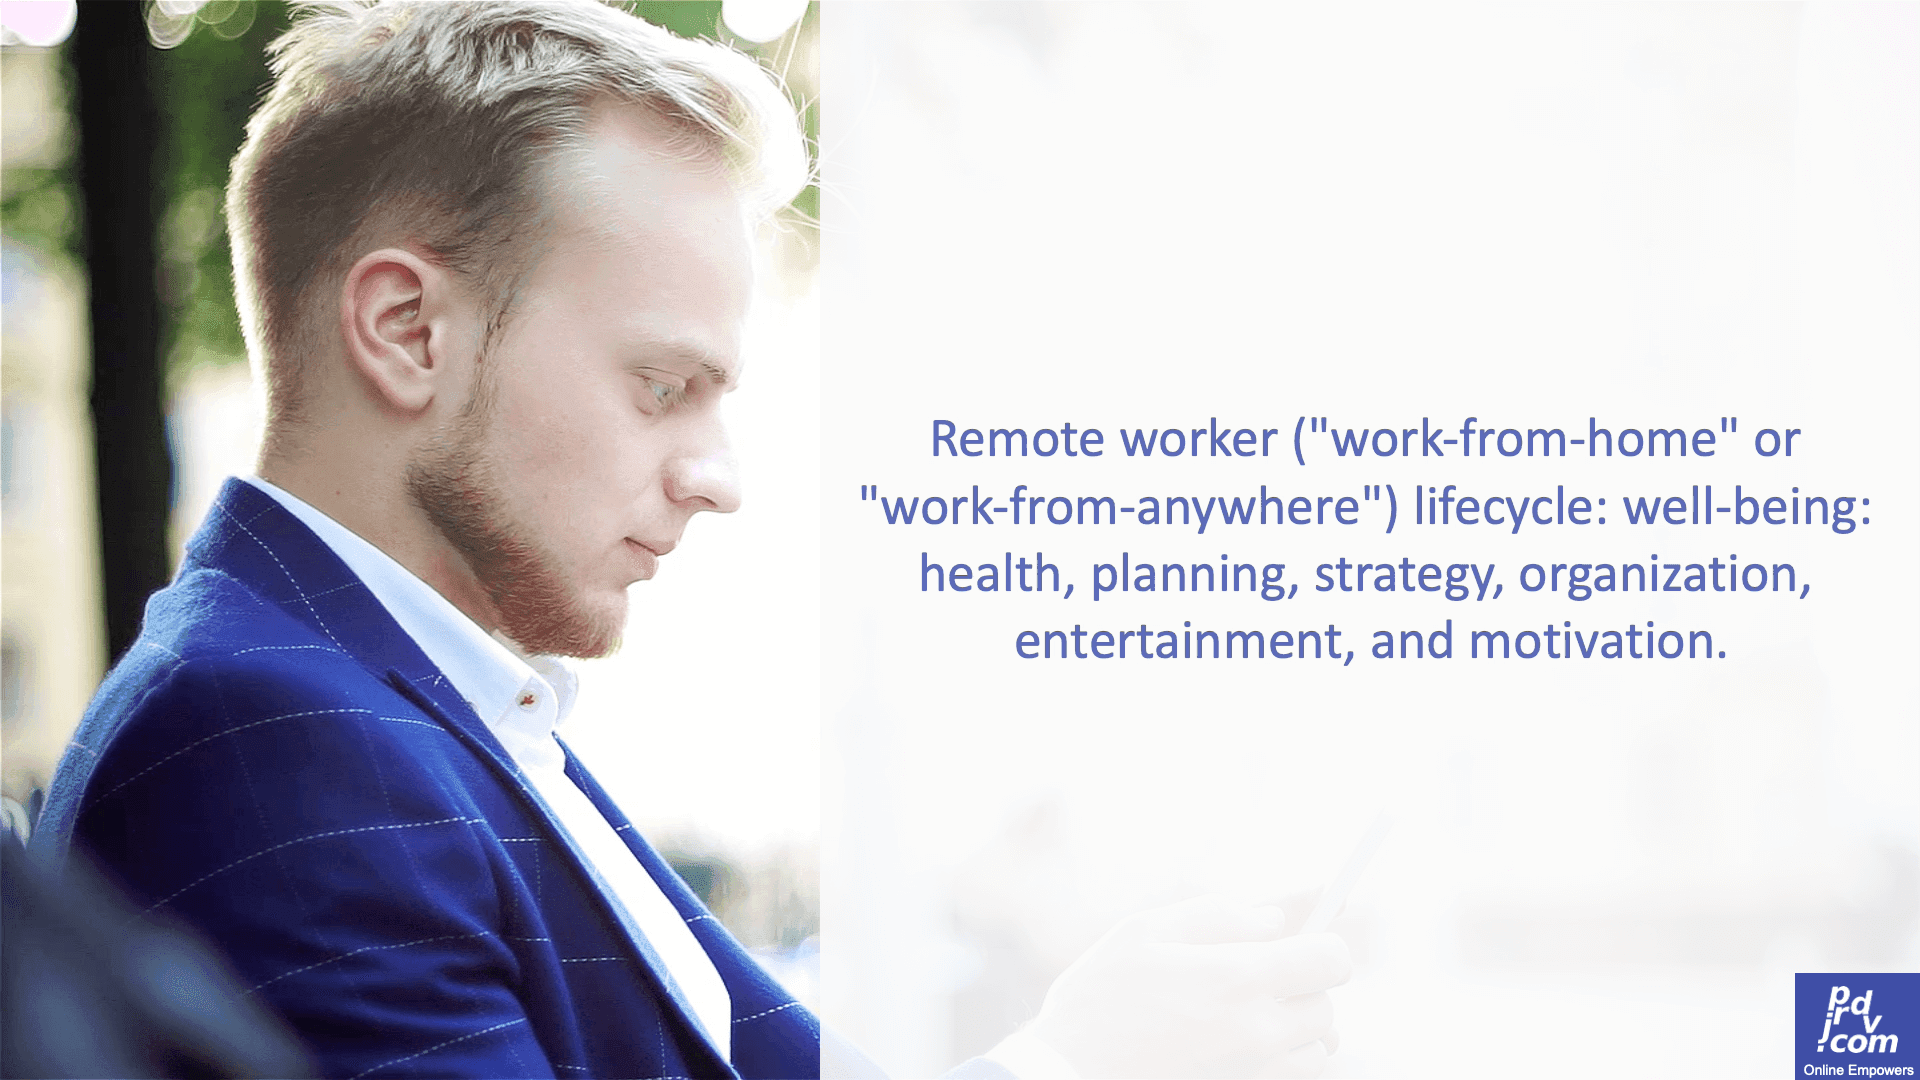 Remote worker (work-from-home or work-from-anywhere) lifecycle: well-being: health, planning, strategy, organization, entertainment, and motivation.